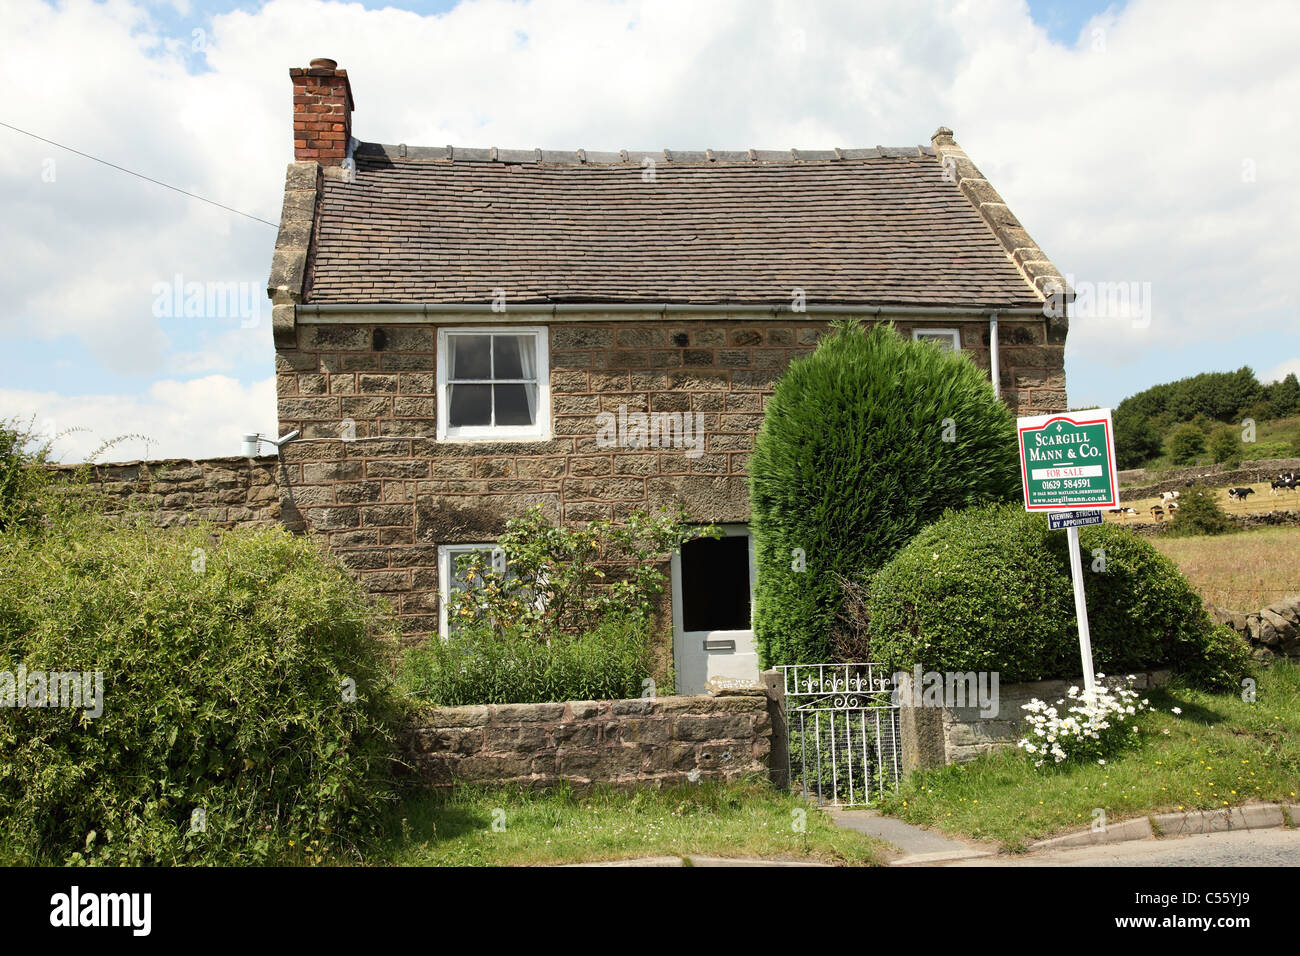 A cottage for sale and advertised as having holiday home potential in Derbyshire, England, U.K. Stock Photo